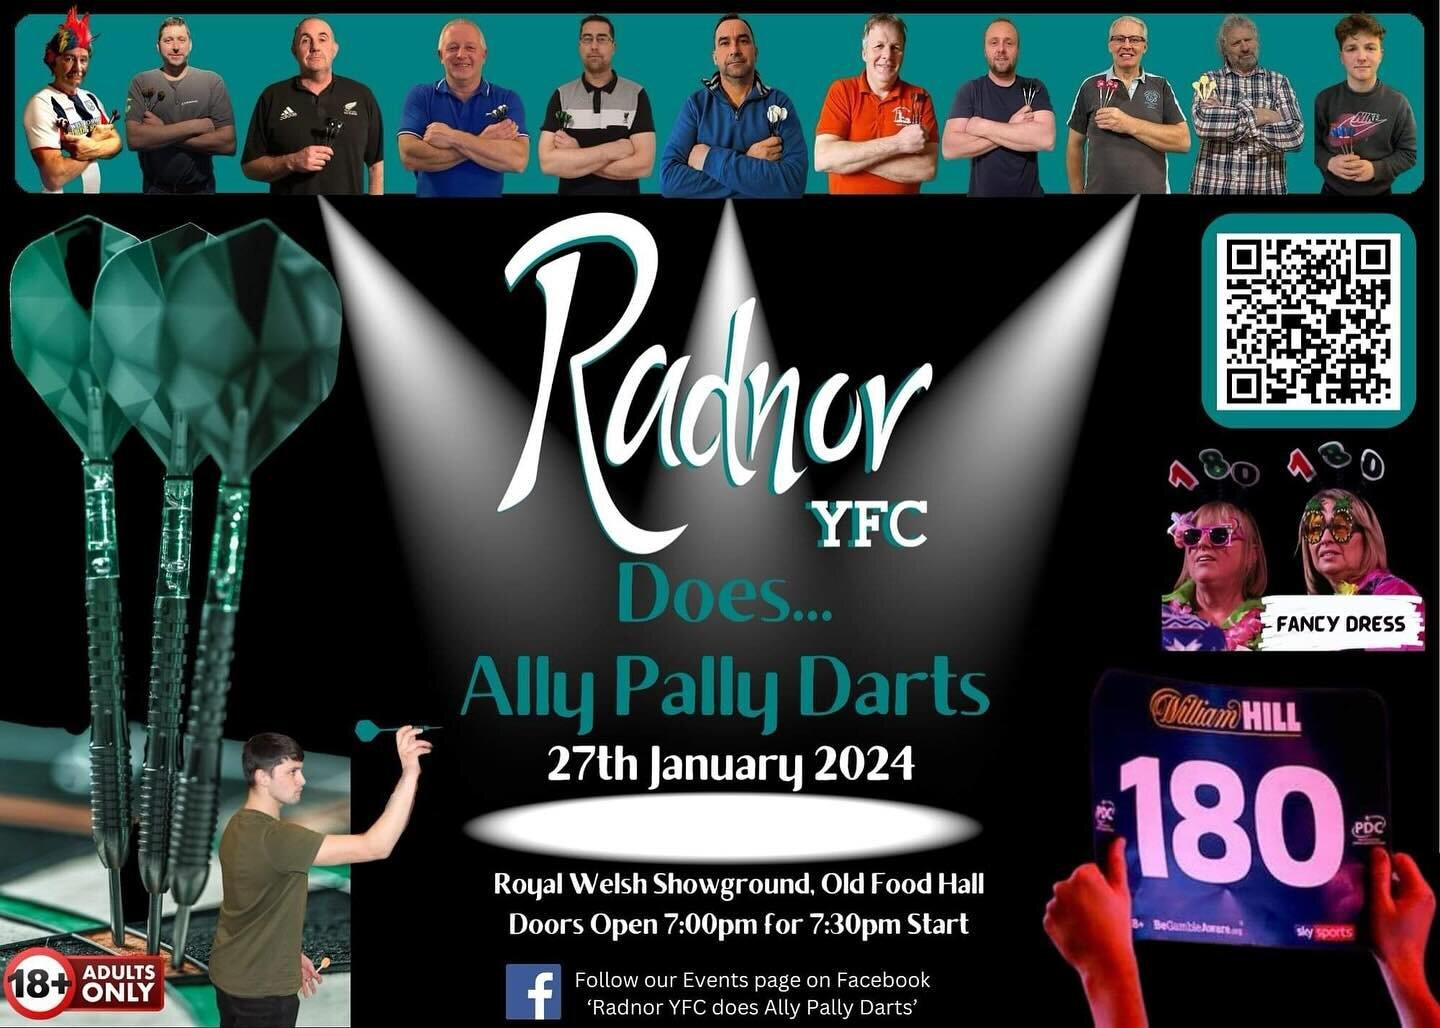 COMPETITION TIME 🎯✨ WIN:
⭐️Two Tickets ⭐️&pound;20 Bar Tab  All you have to do is 
1. Share this post to your story 
2. Tag @radnoryfc in it! 
Good luck 🍀
This competition is also on Facebook. If you&rsquo;ve already entered on Facebook, enter agai